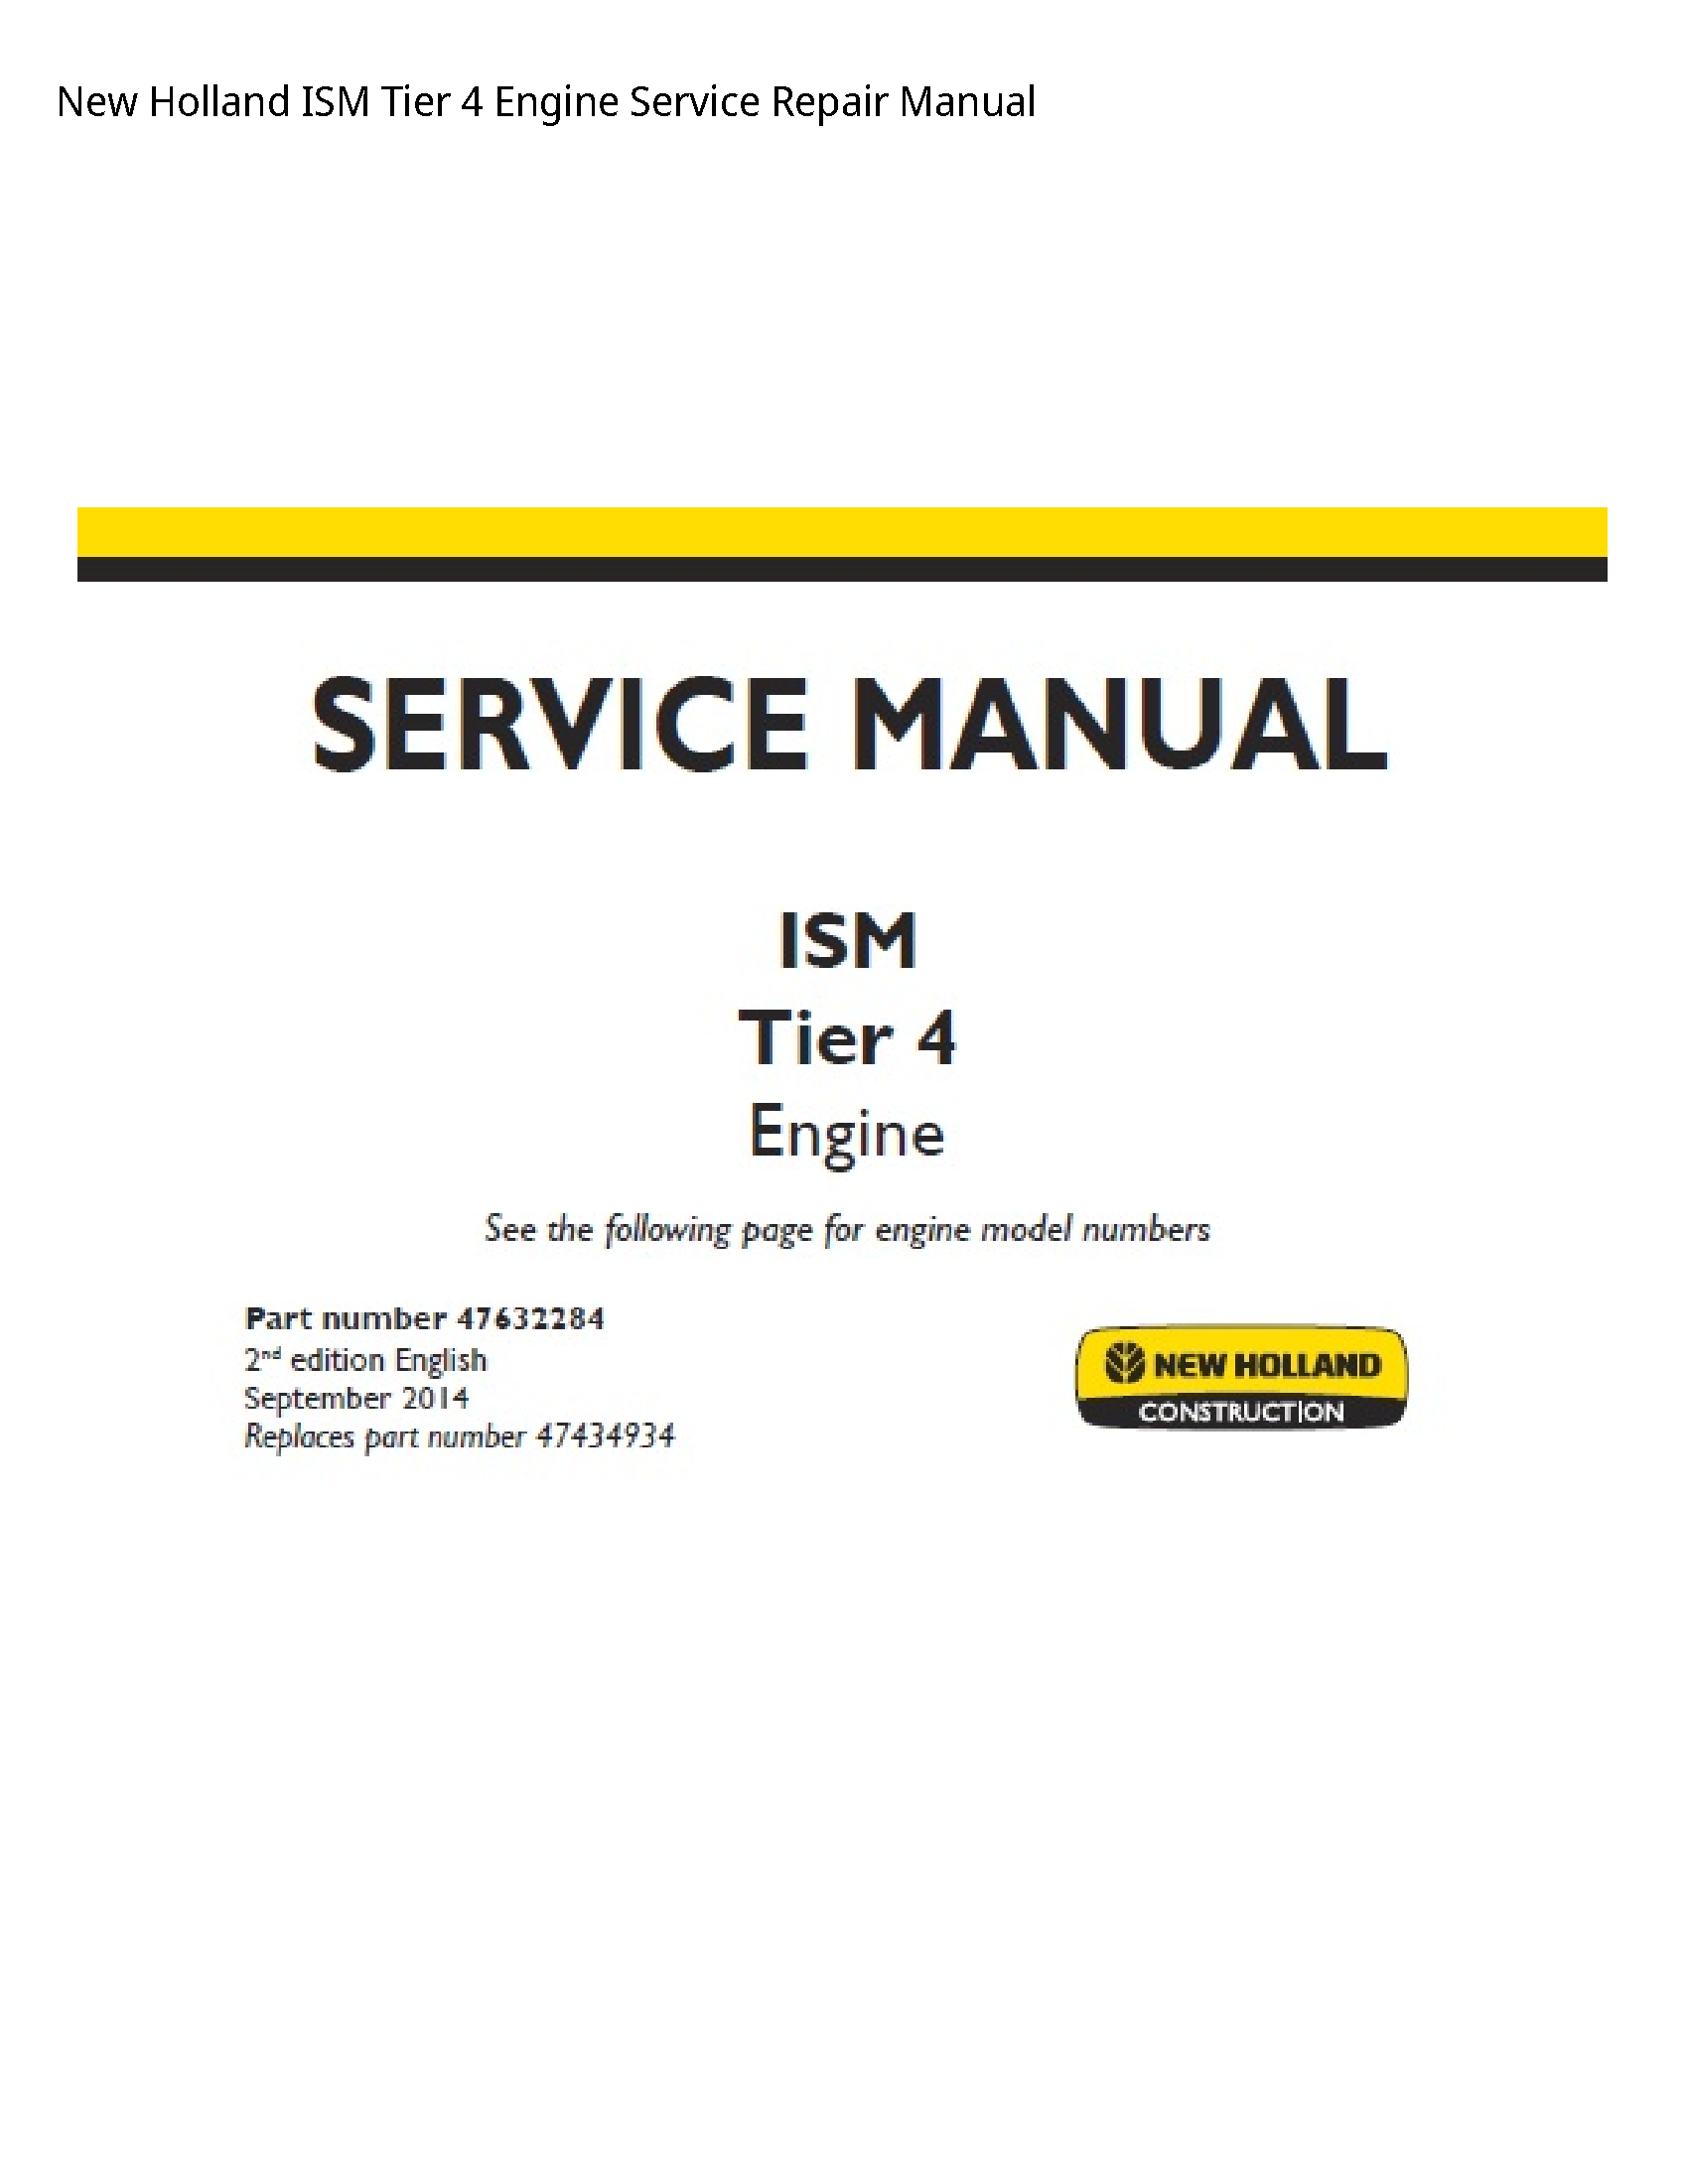 New Holland 4 ISM Tier Engine manual